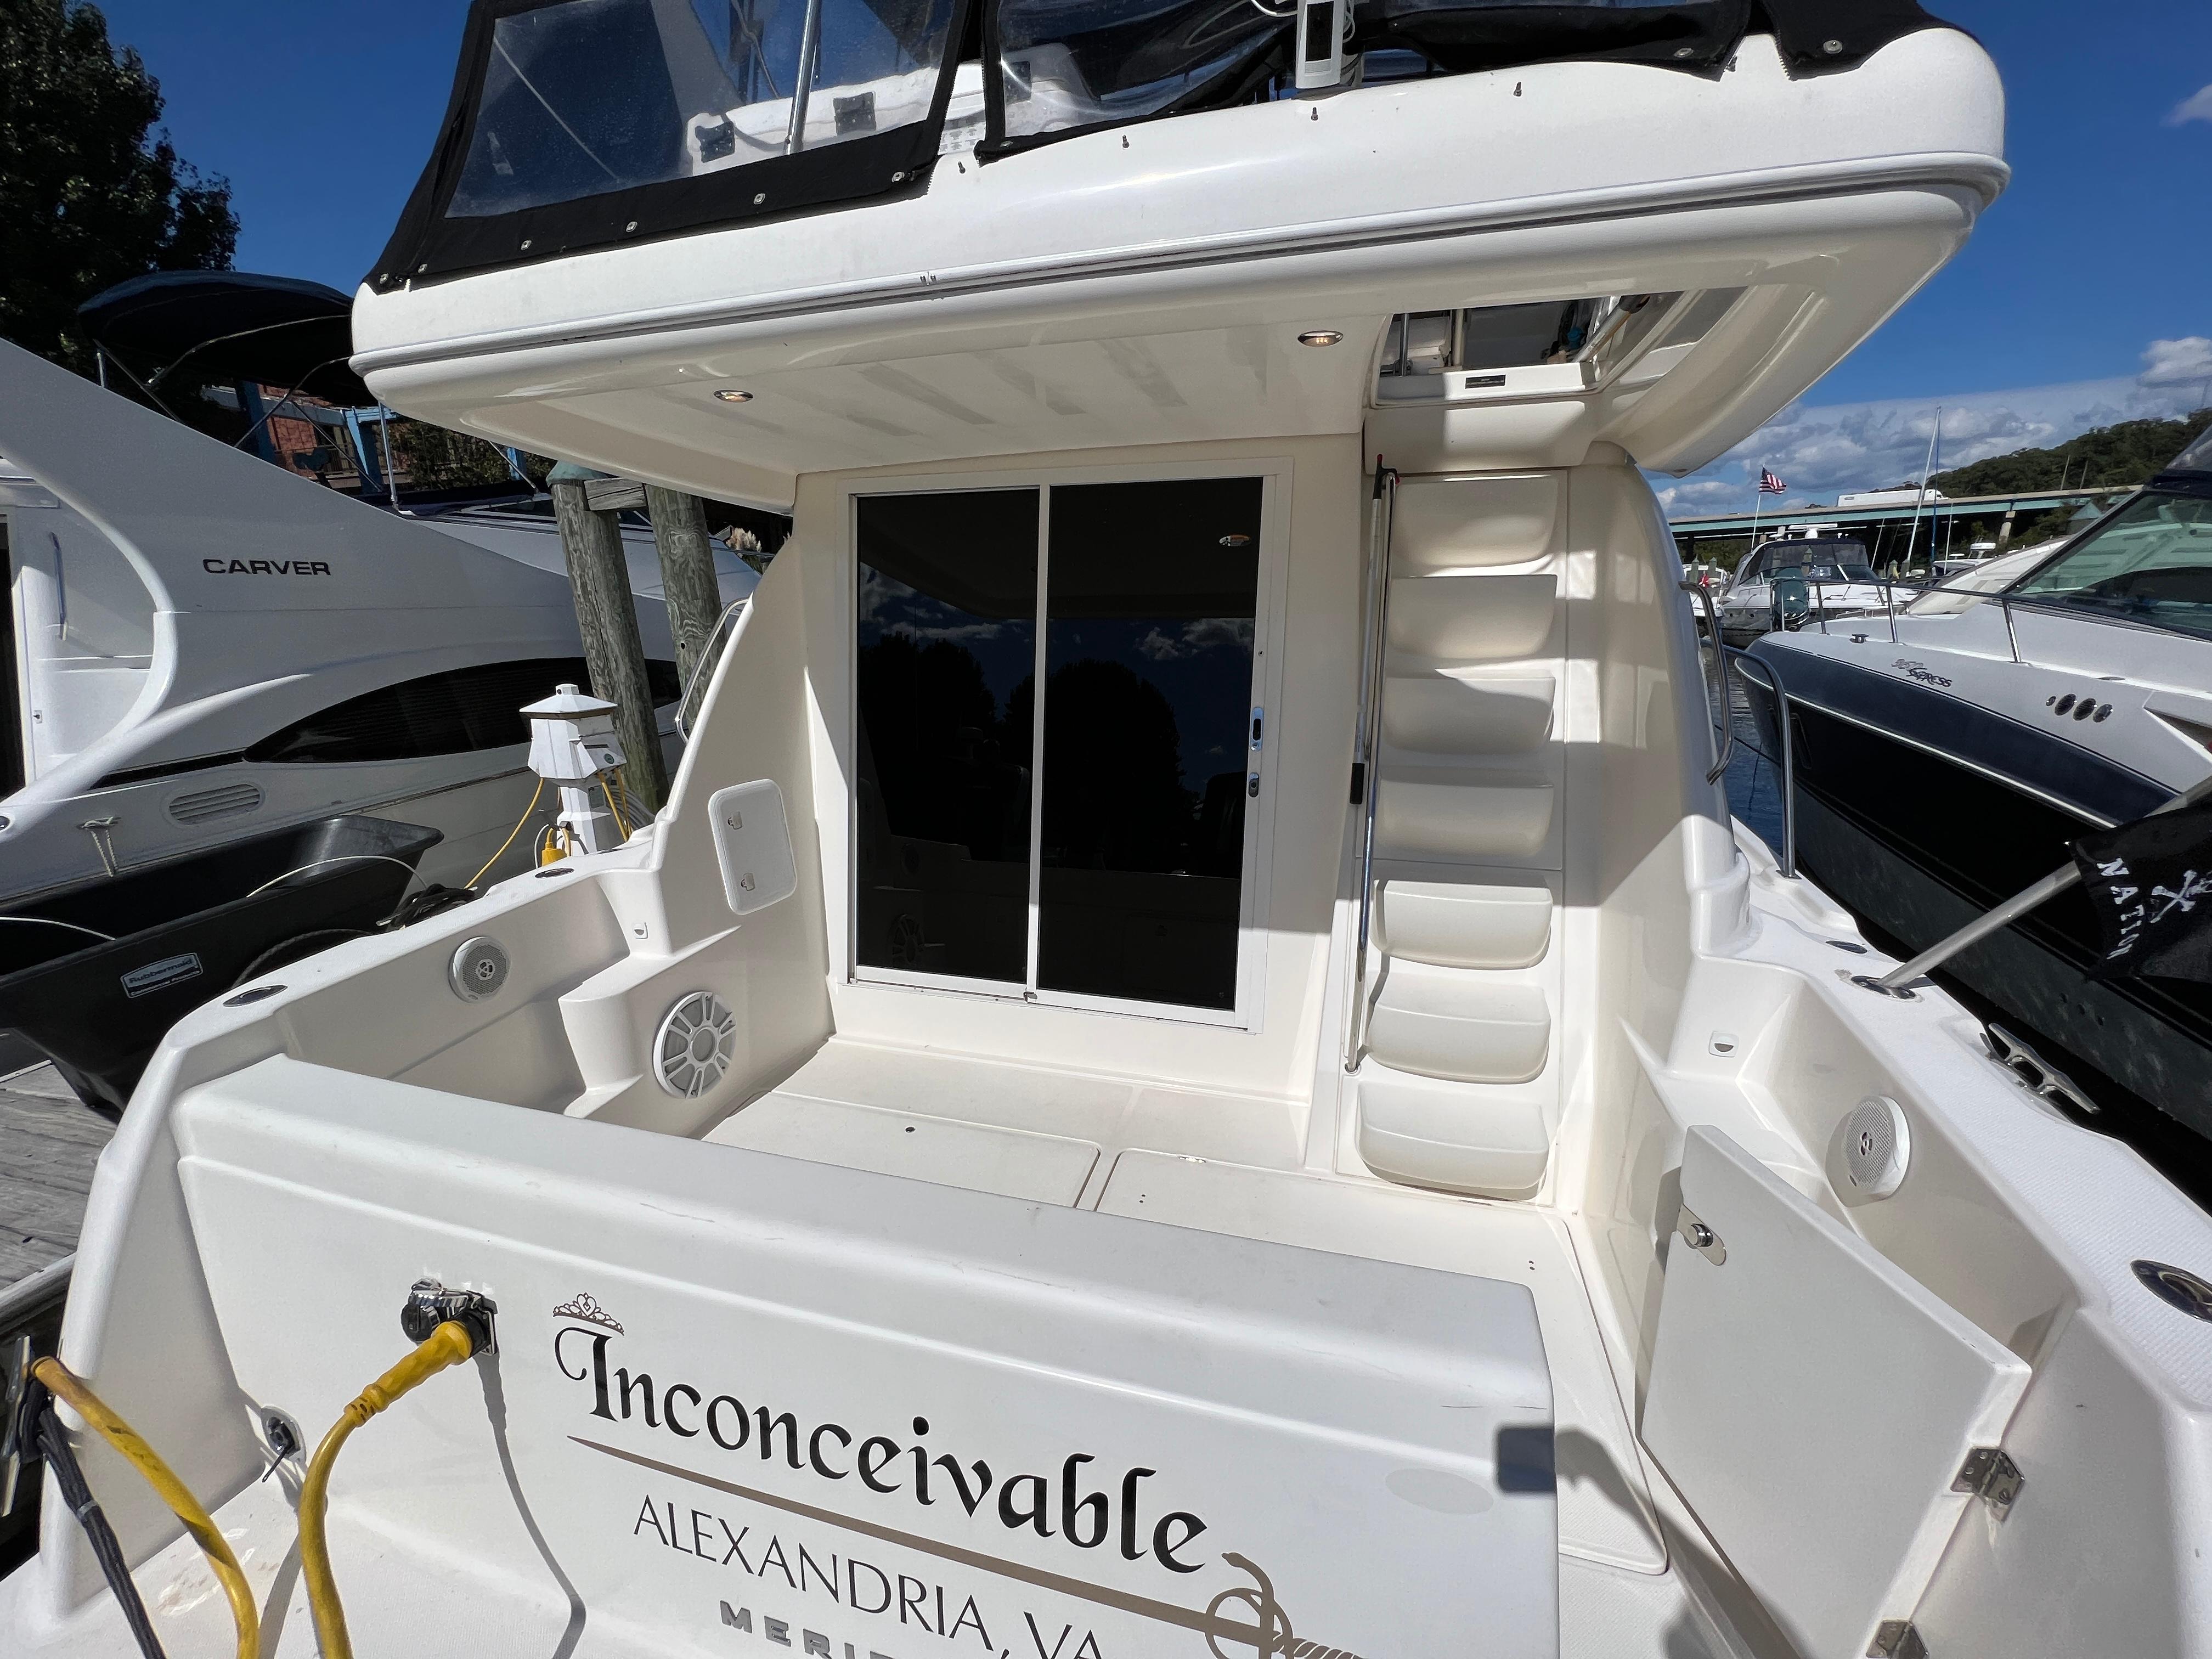 INCONCEIVABLE Yacht Brokers of Annapolis